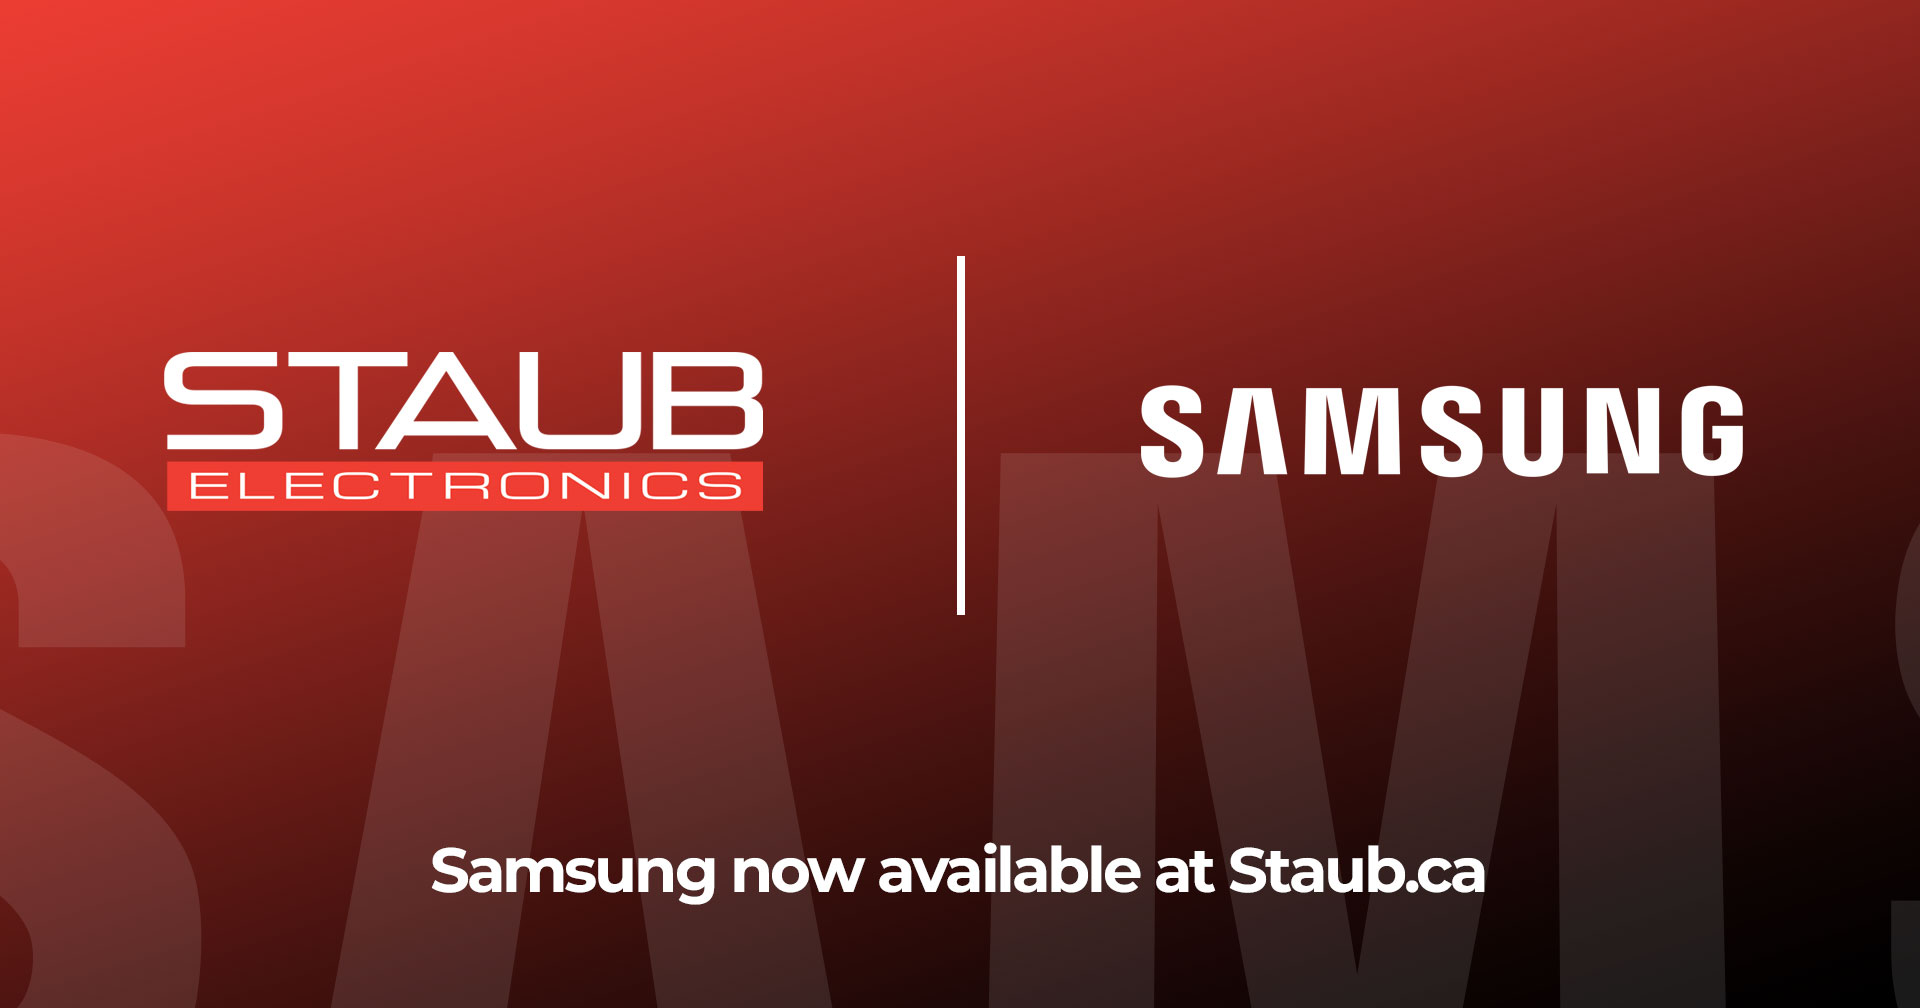 Satub Electronics expands its TV offerings with innovations from Samsung Canada - Samsung Newsroom Canada

